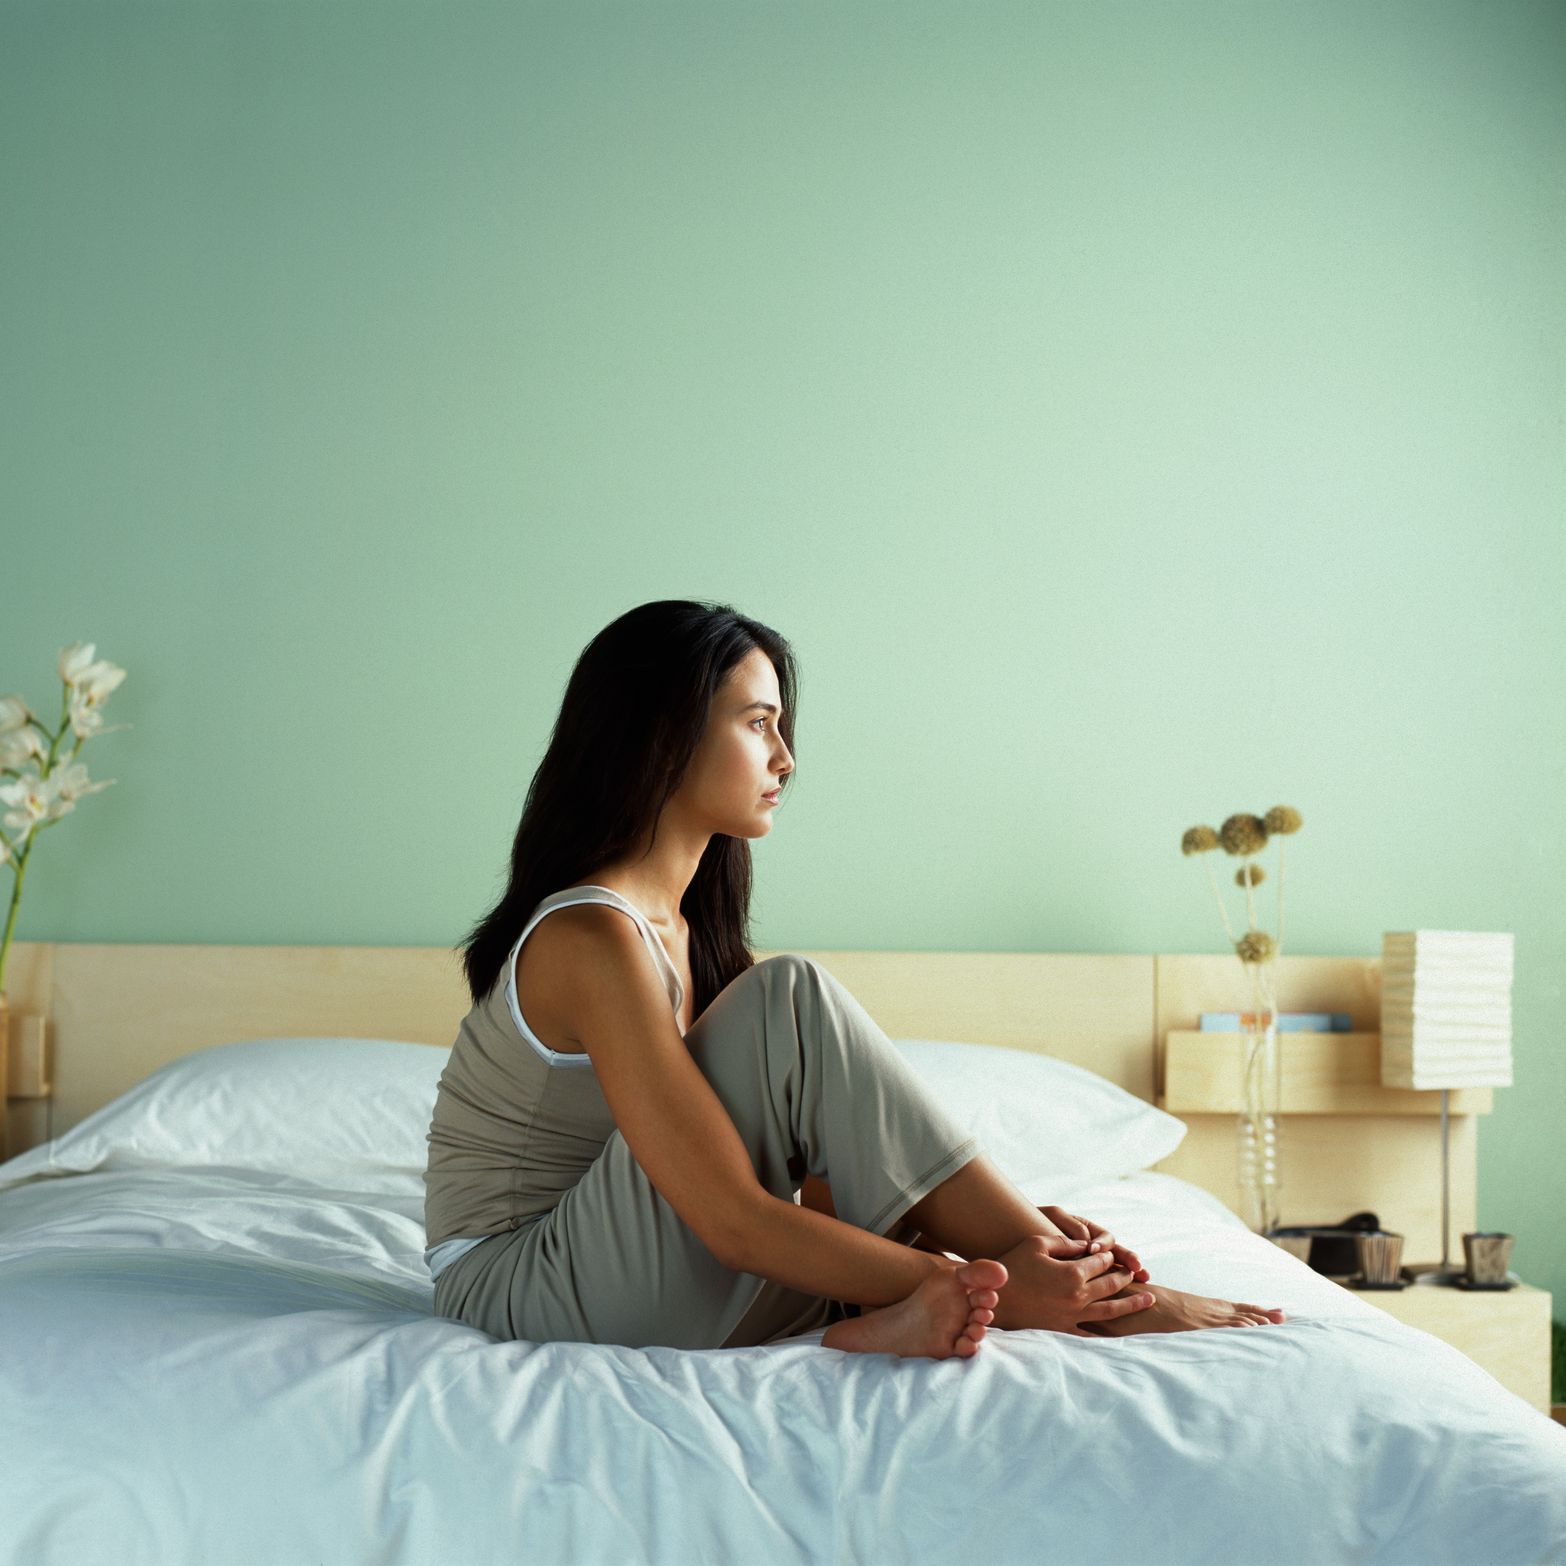 Young woman sitting on bed, side view